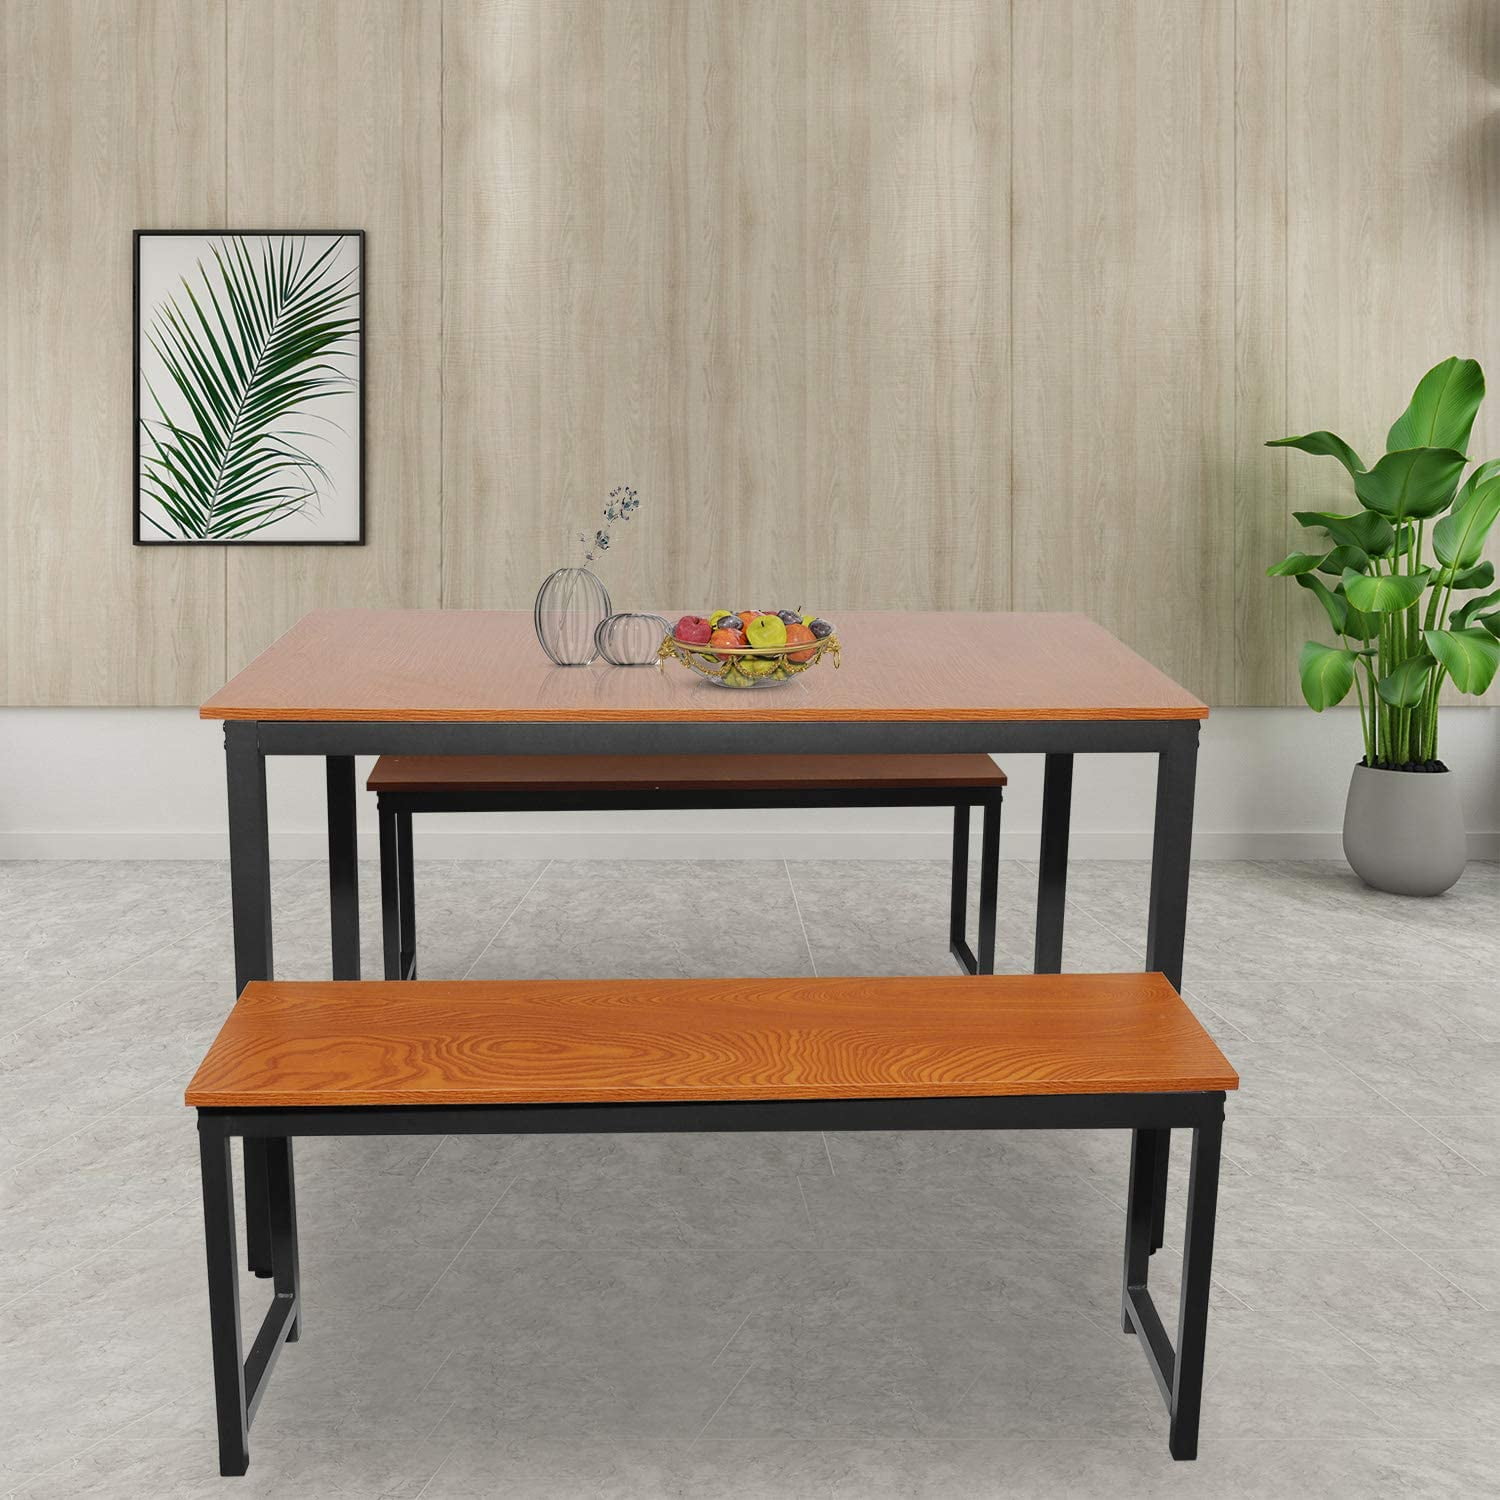 Dining Table Set With Bench Wood Kitchen Table With 2 Benches And Metal Frame Breakfast Nook Dining Room Set Modern Furniture For Home Apartment 3 Piece Dining Set For Small Space Brown